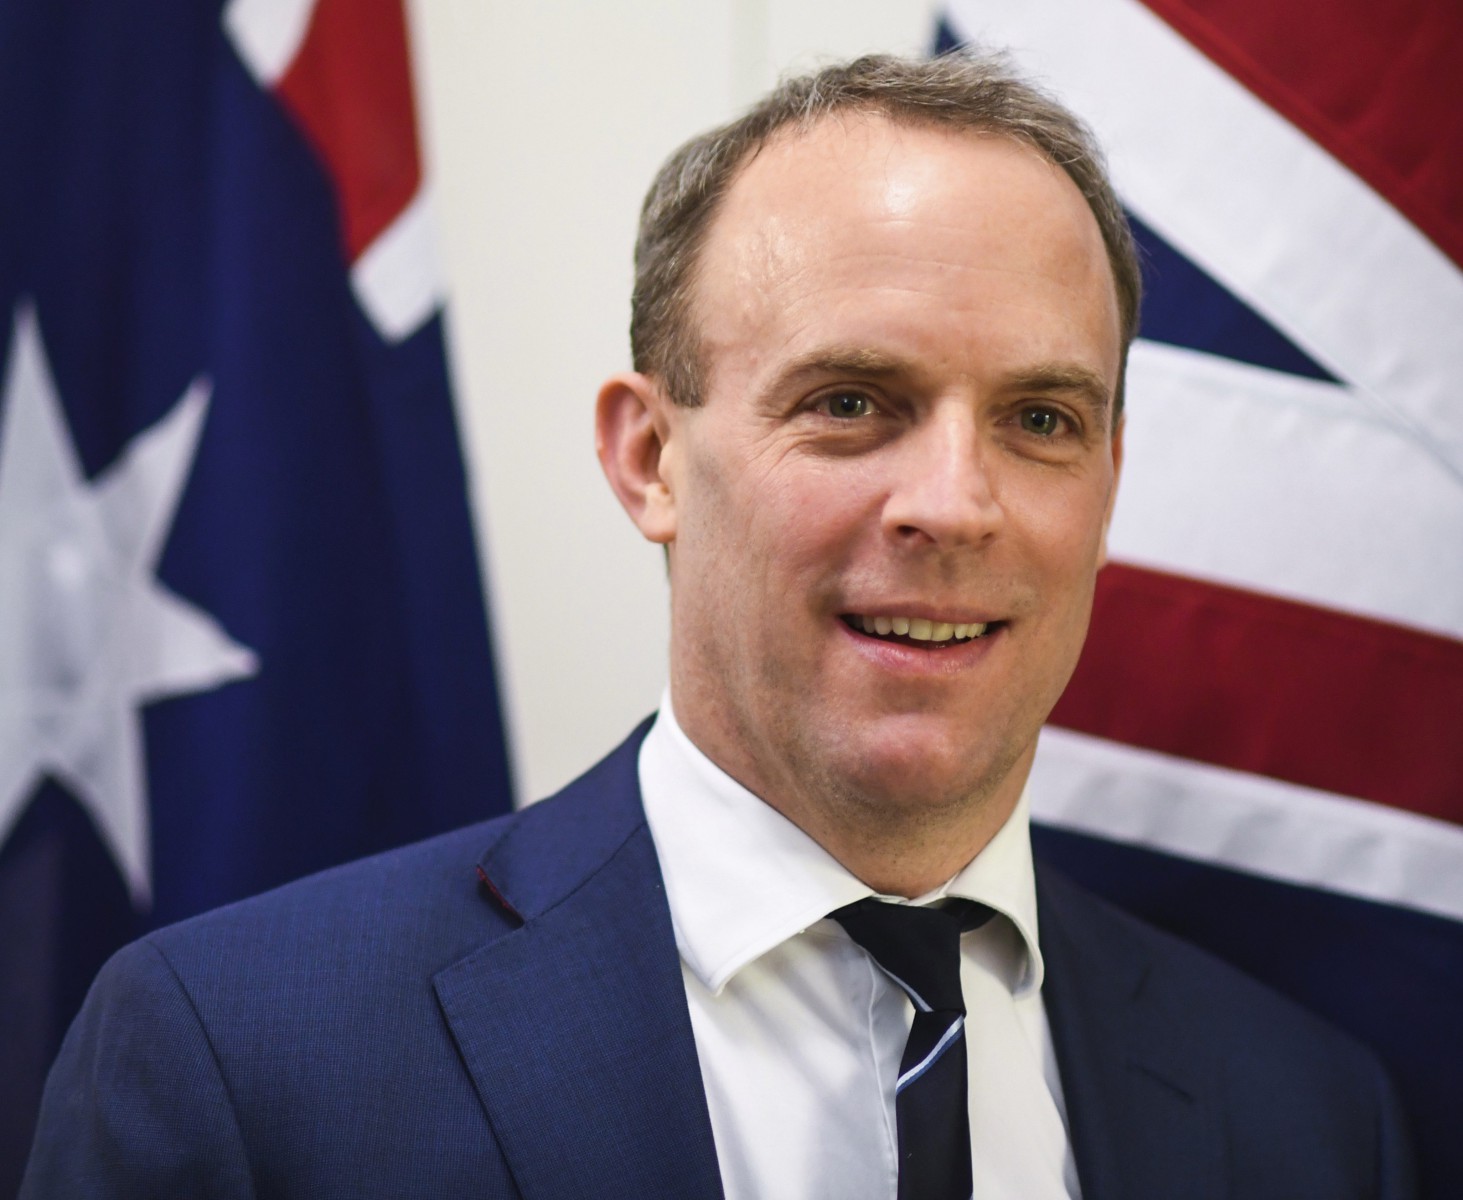 Dominic Raab promised UK support for areas of Australia ravaged by bushfires while on a visit to discuss a trade deal